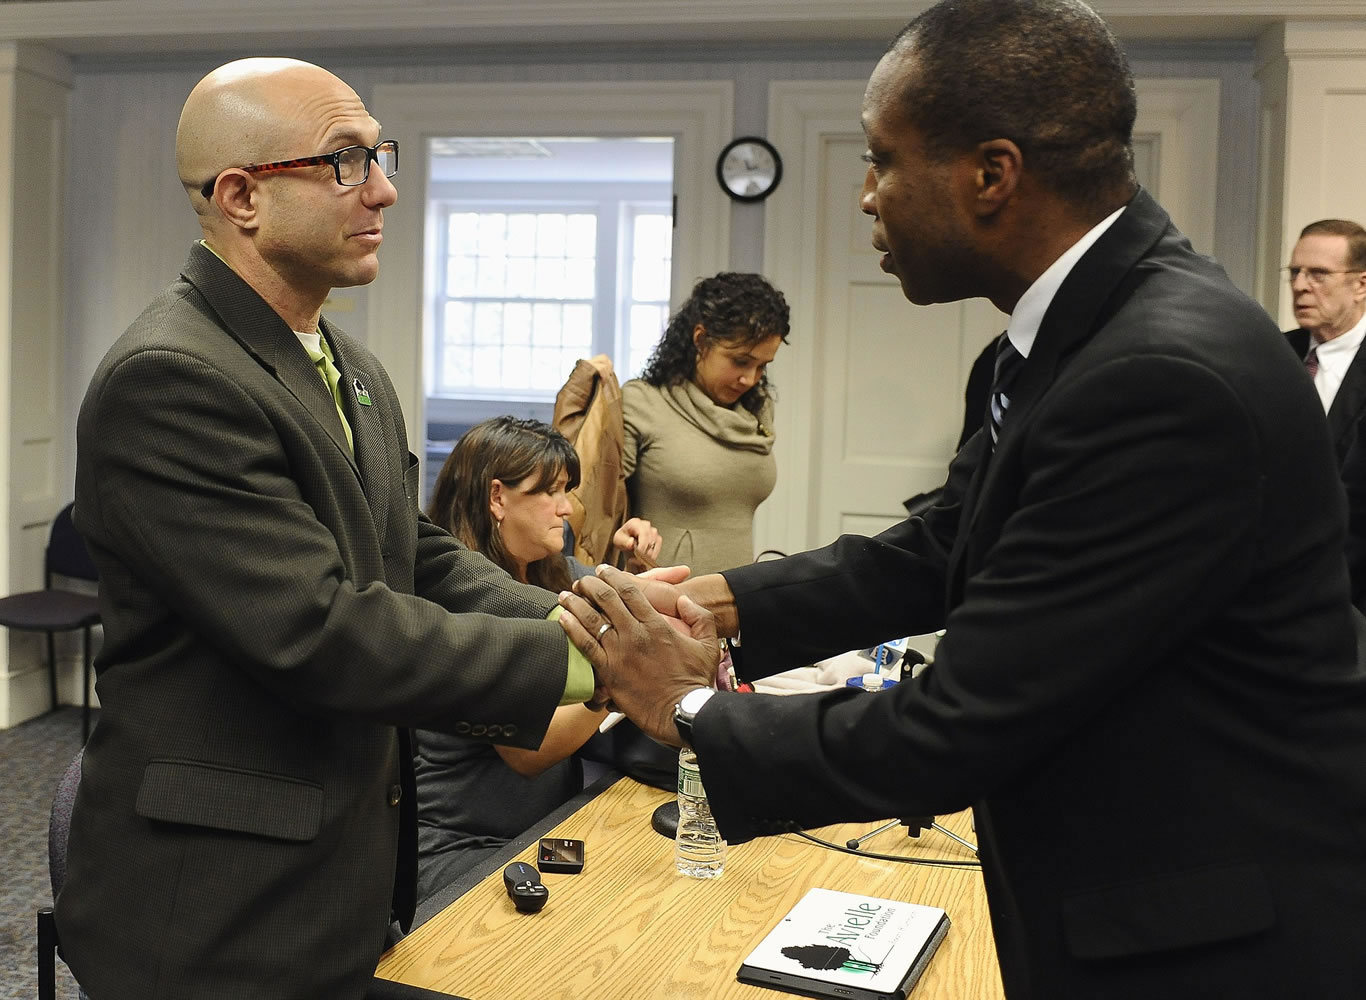 Jeremy Richman, father of Sandy Hook Elementary school shooting victim Avielle Richman, left, shakes hands with Scott Jackson, Chairman of the Sandy Hook Advisory Commission after meeting, Friday, Nov. 14, 2014, in Newtown, Conn. The parents of two children killed made presentations on ways to better address mental health, school safety and gun violence prevention.